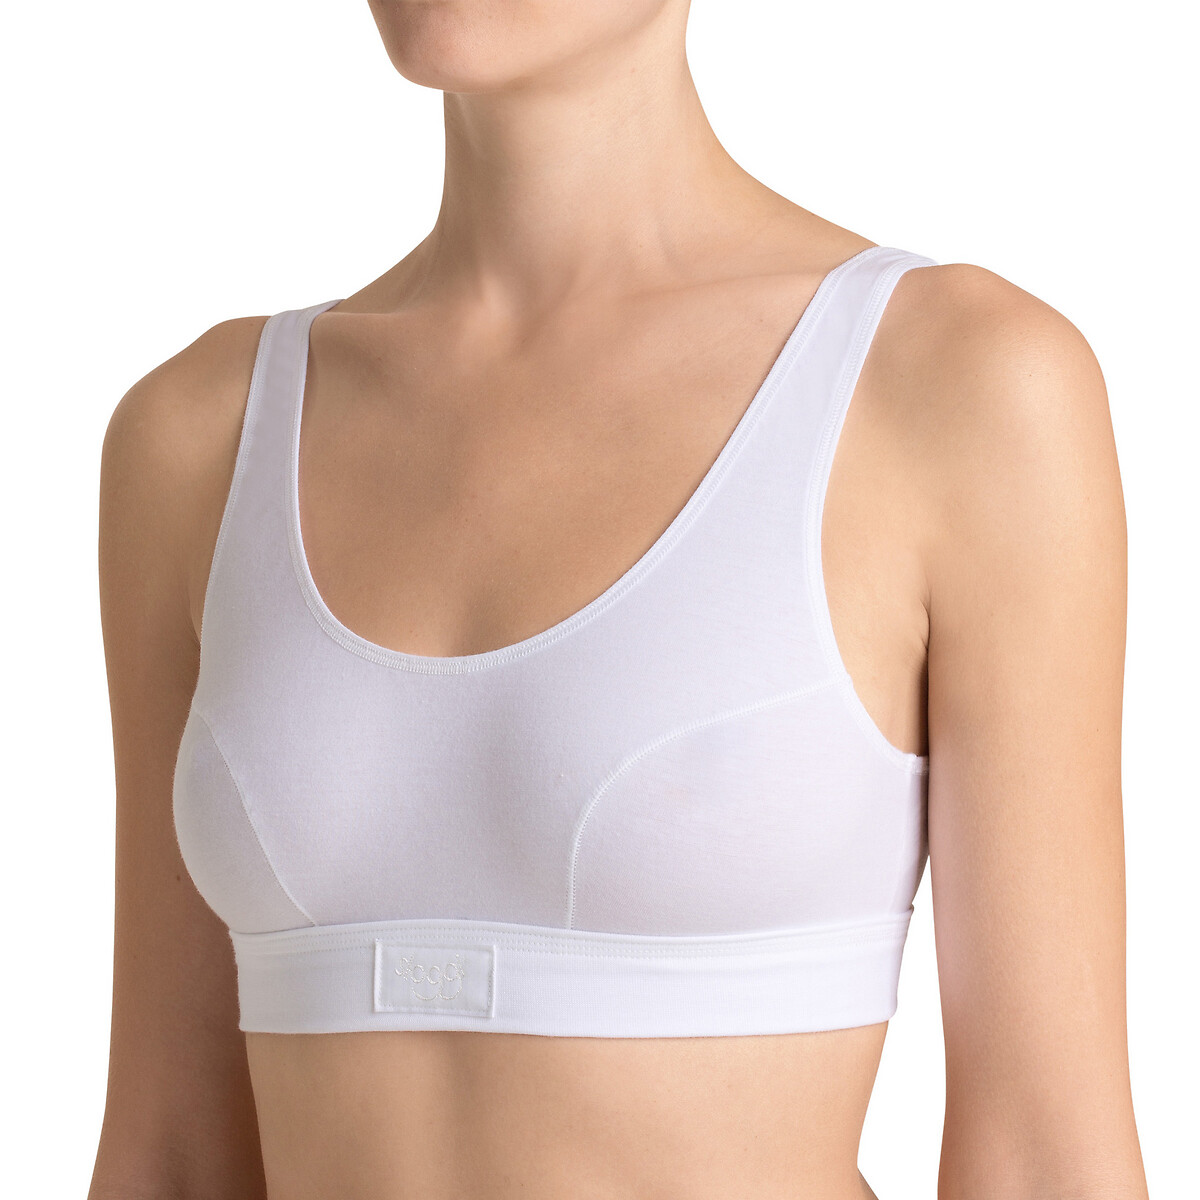 Details about   Sloggi Double Comfort Soft Cup Non Wired Bra Top Black White Assorted Sized 